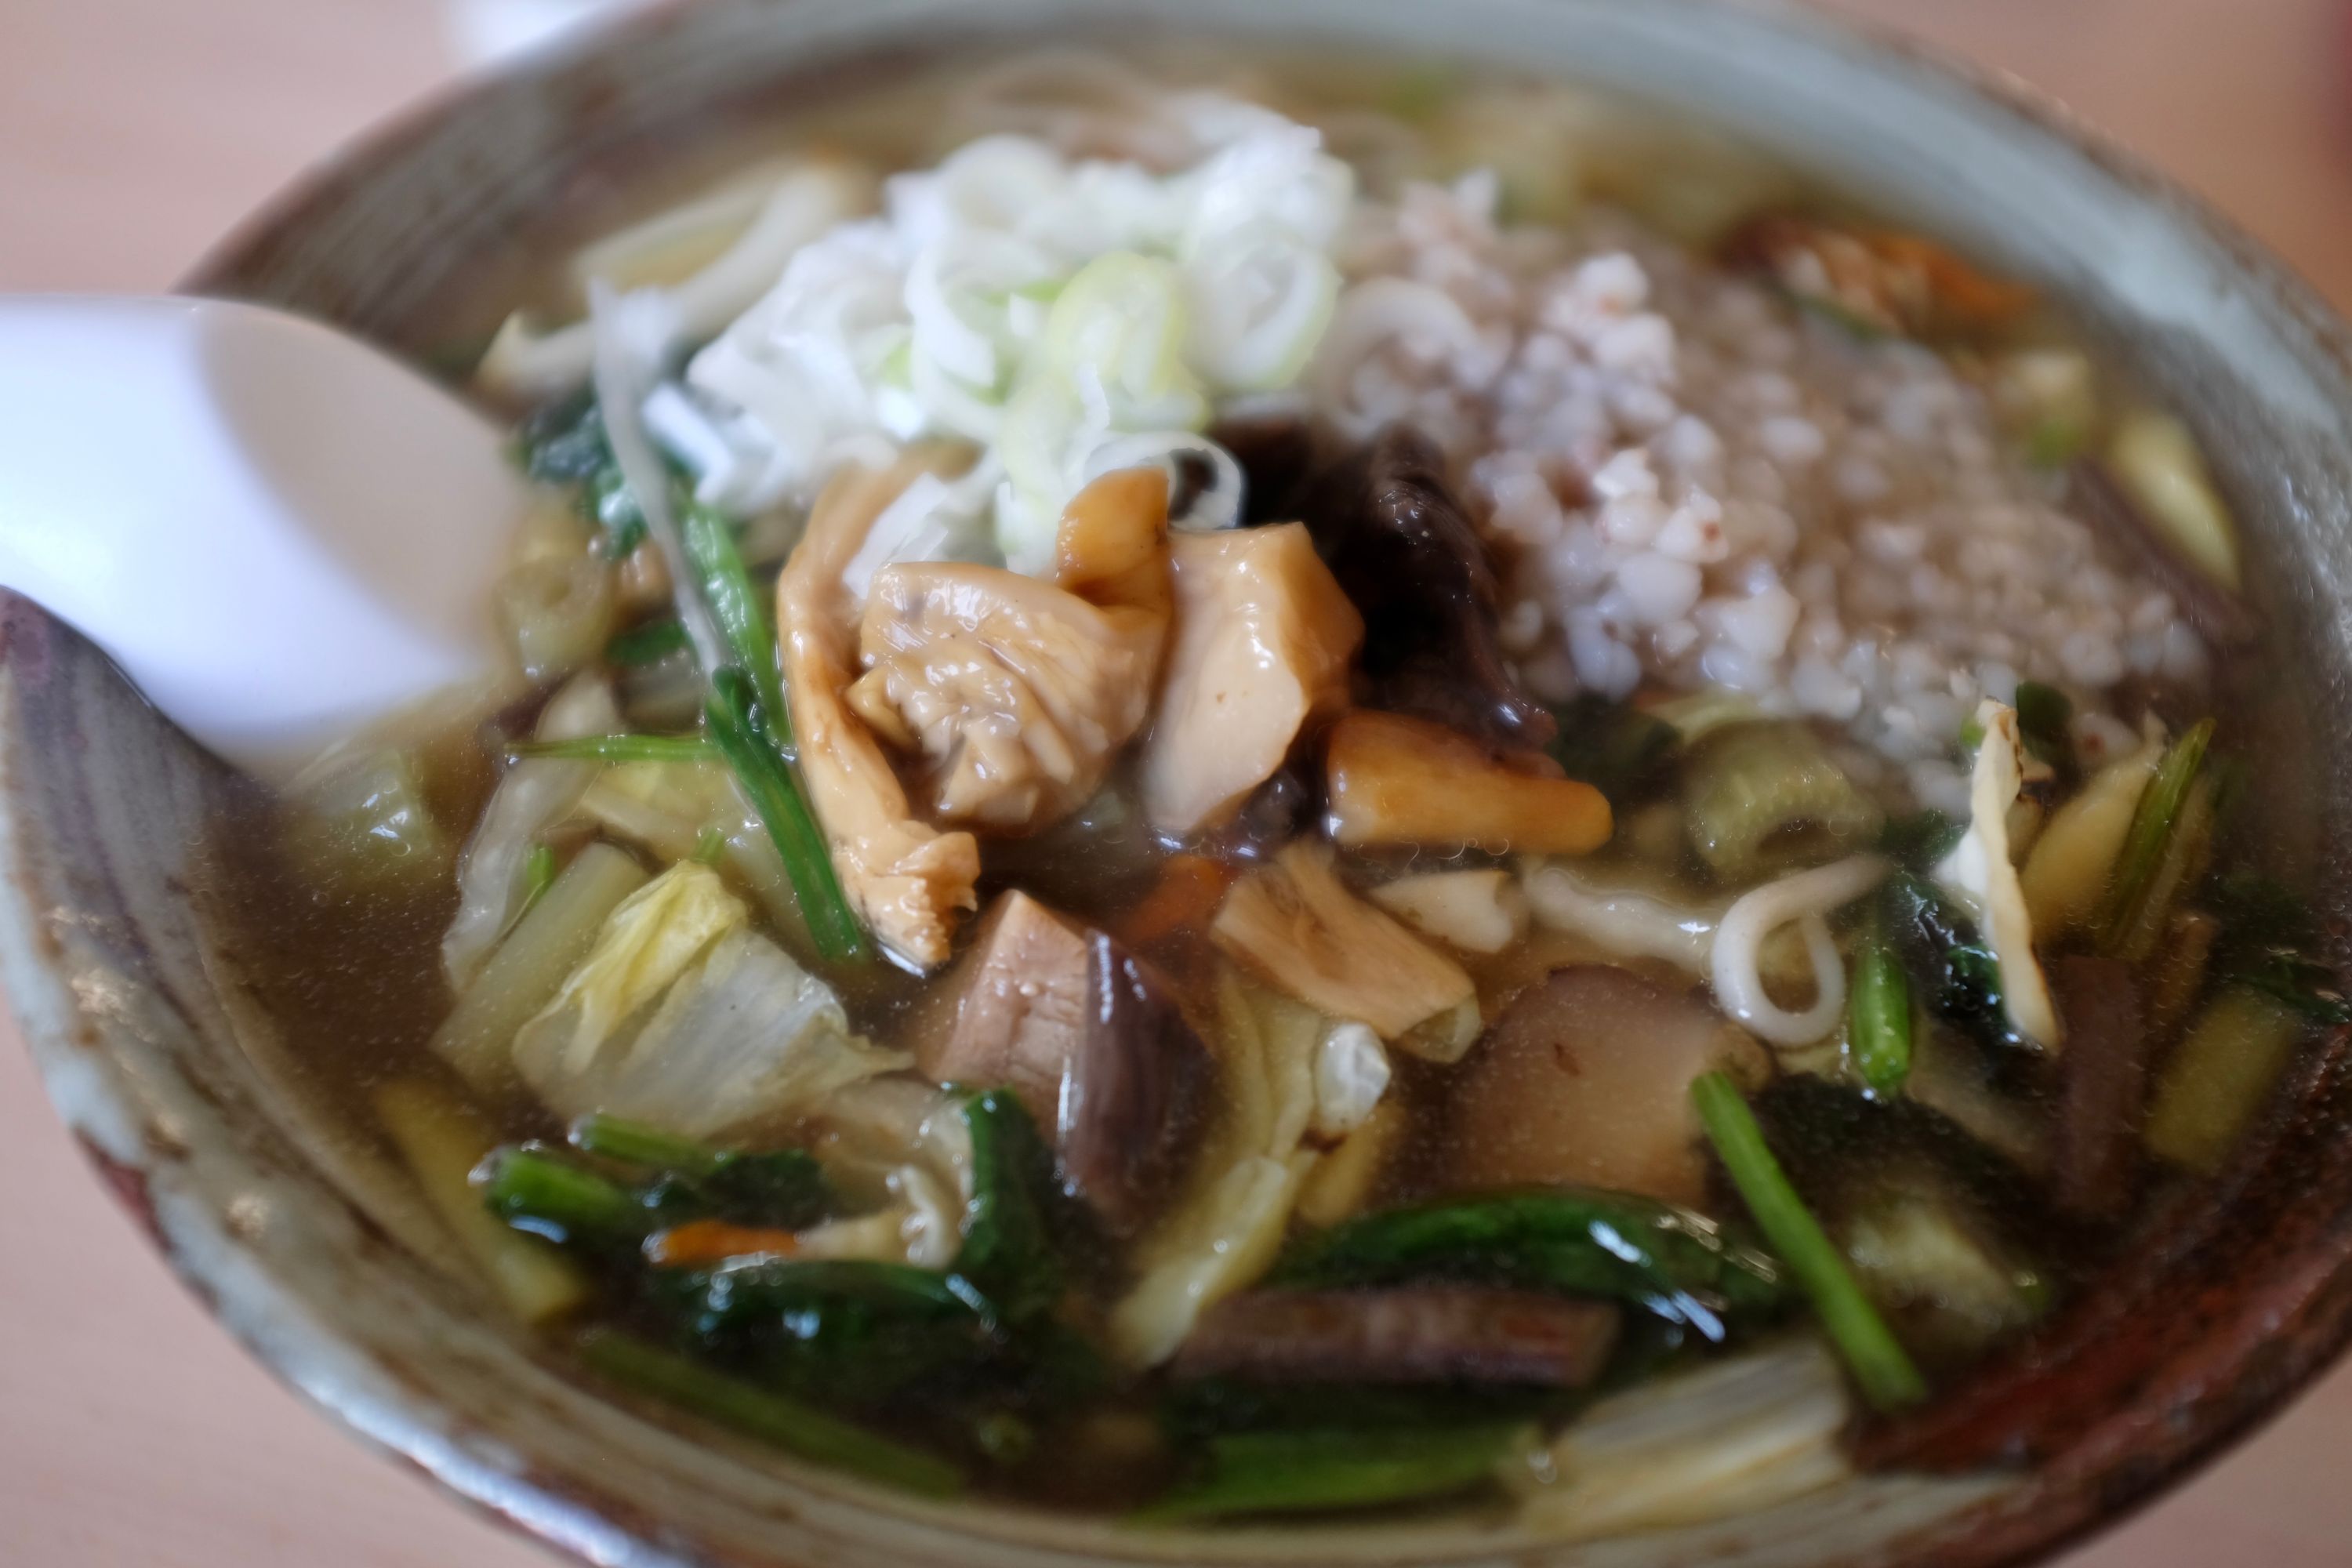 Closeup of a bowl of rice, mushrooms, and vegetables.